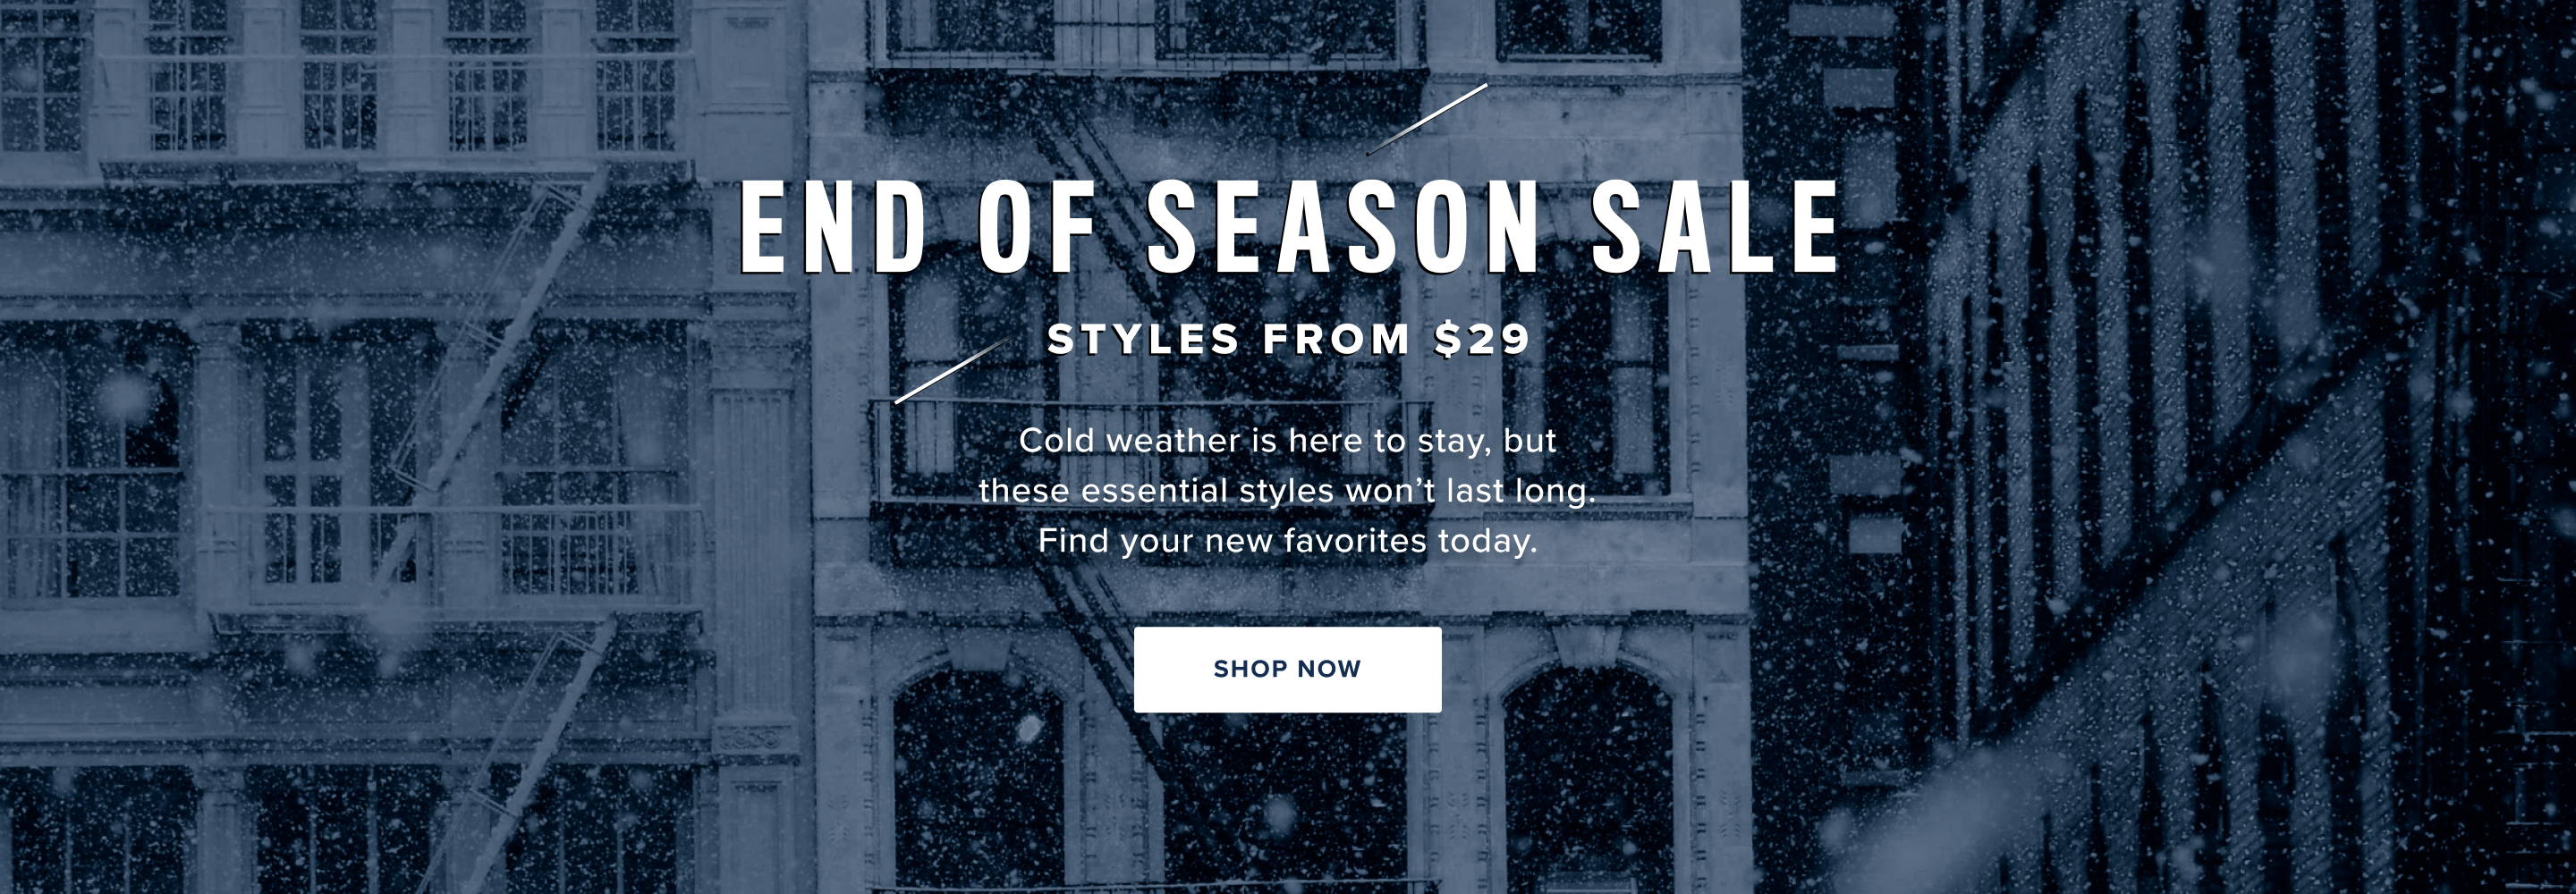 End of season sale. Styles from $29